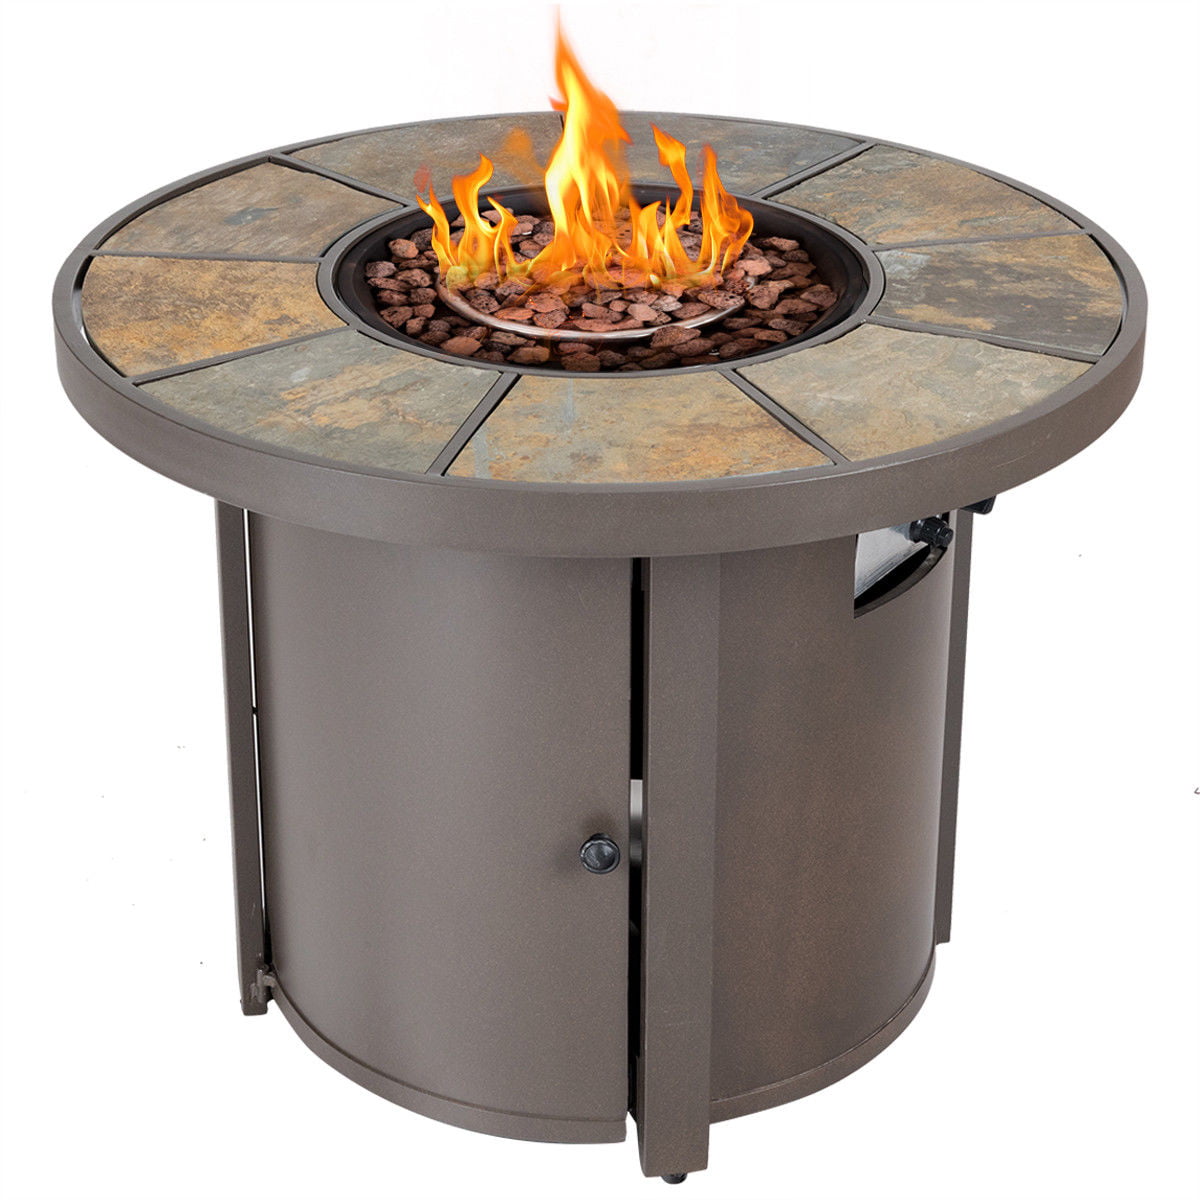 Costway 32 Round Outdoor Propane Gas, Propane Fire Pit Table Vs Patio Heater